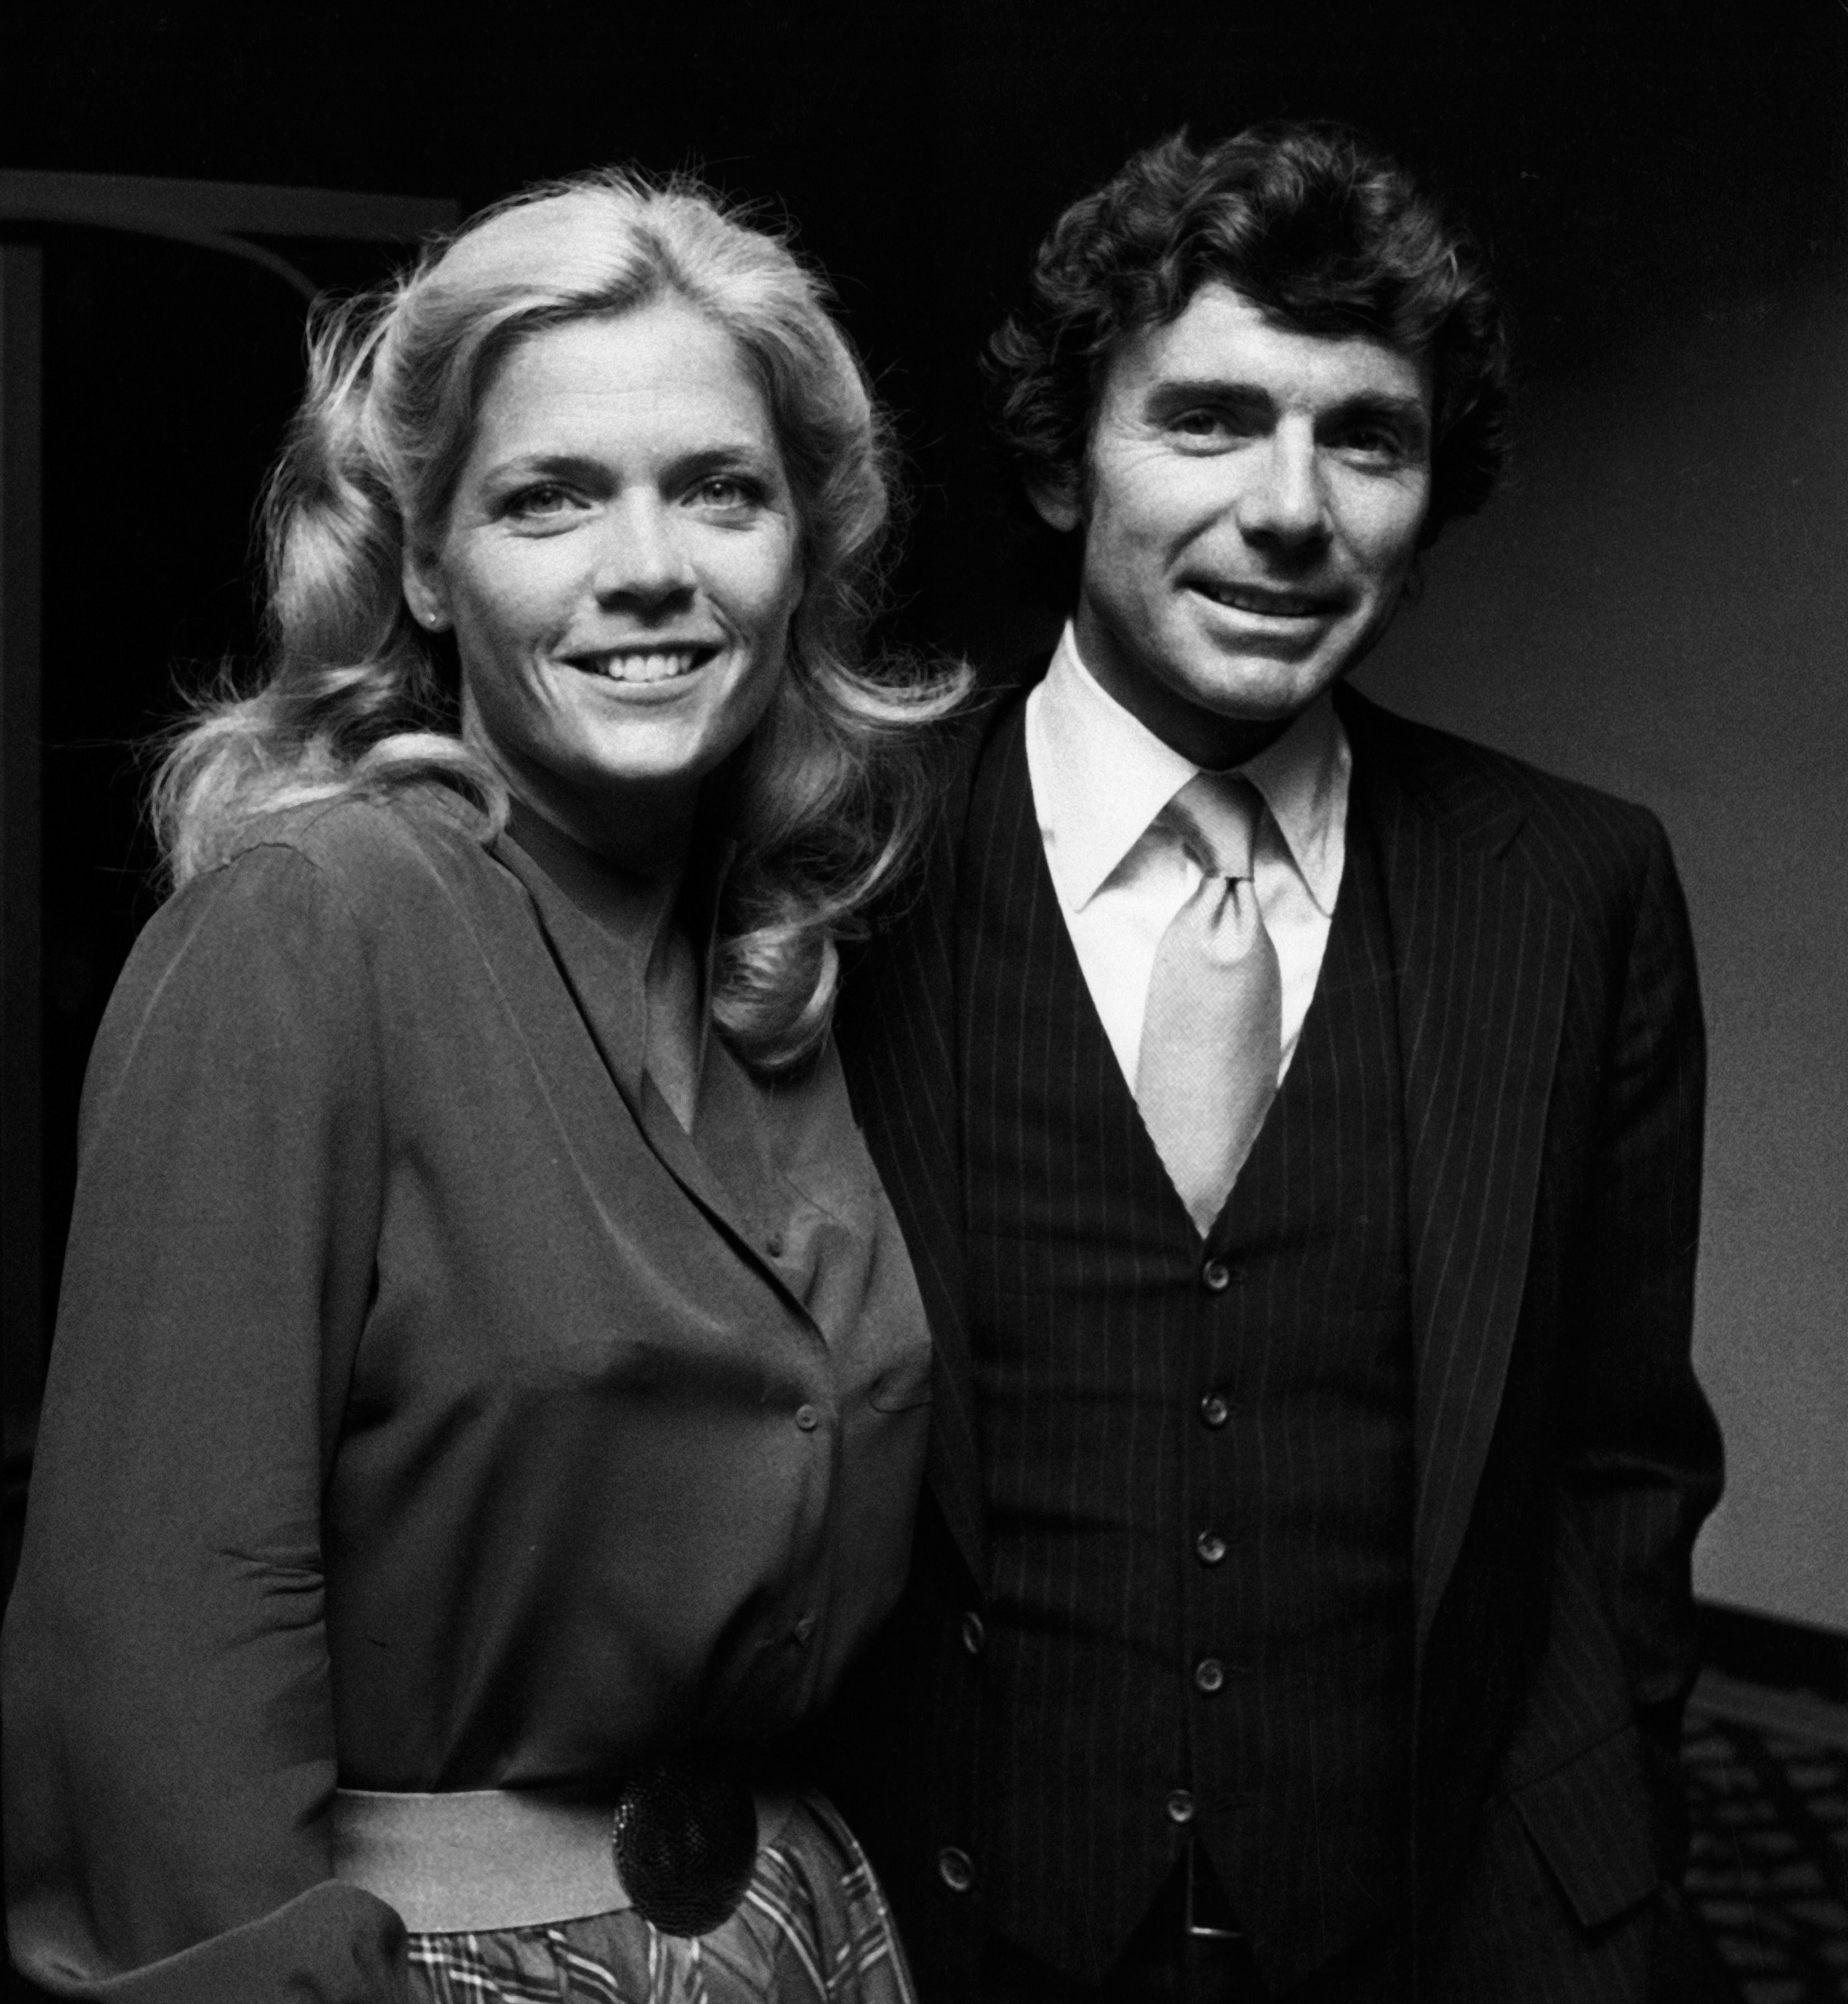 Meredith Baxter and David Birney at the National Drug Awareness Chaim Benefit Convention on April 26, 1982, in Century City, California | Source: Getty Images